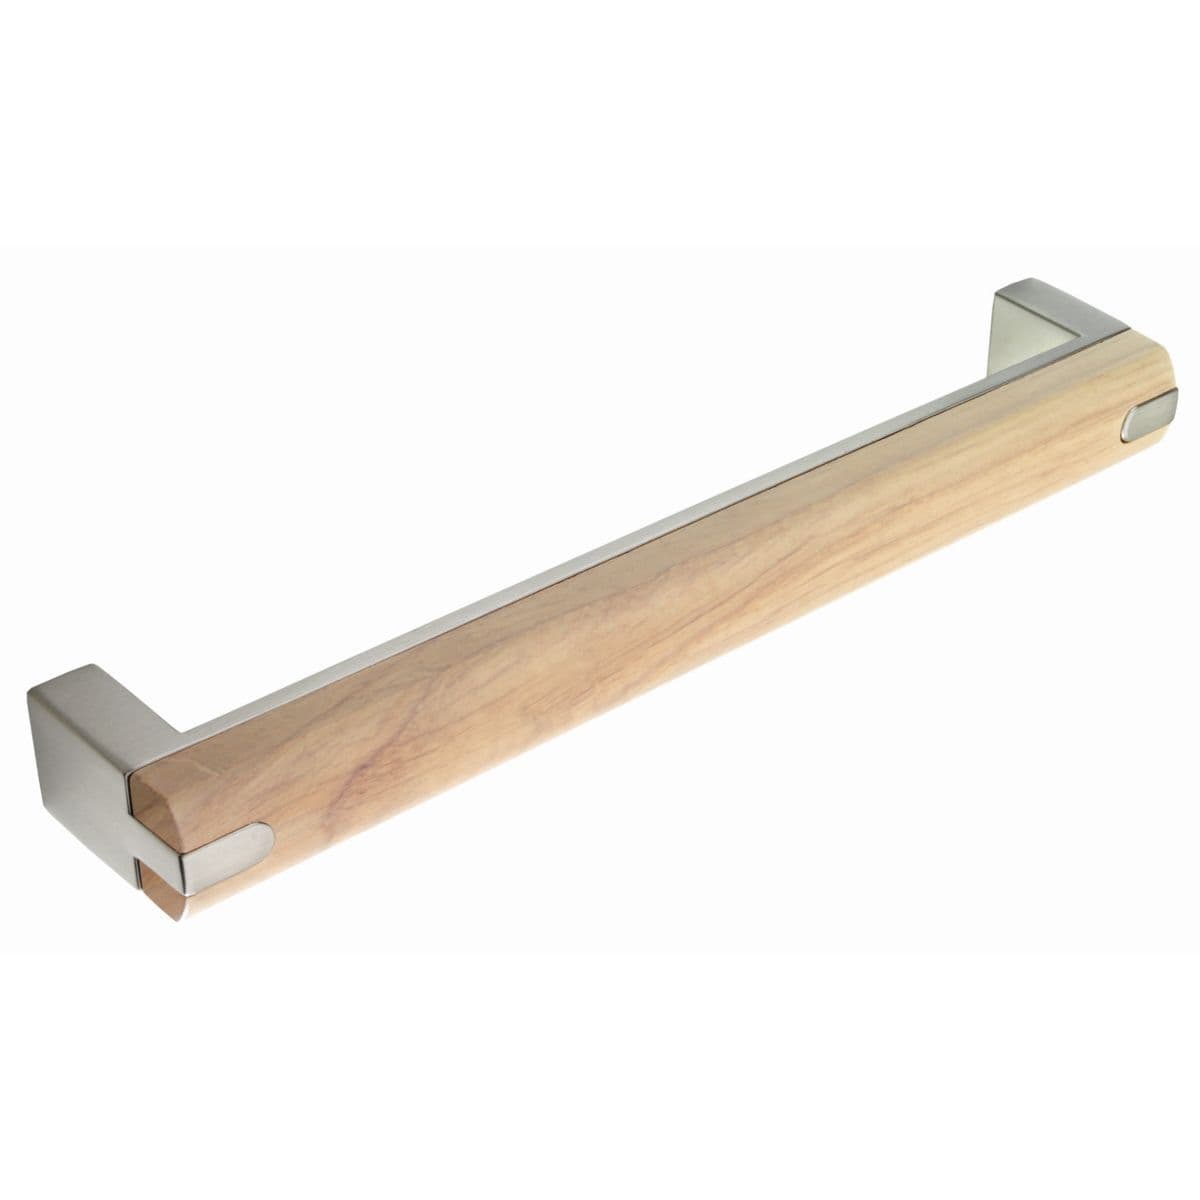 SHORT WOODEN BAR Handle - 160mm h/c size - BRUSHED S/STEEL EFFECT & OAK finish (PWS H438.160.BSO)